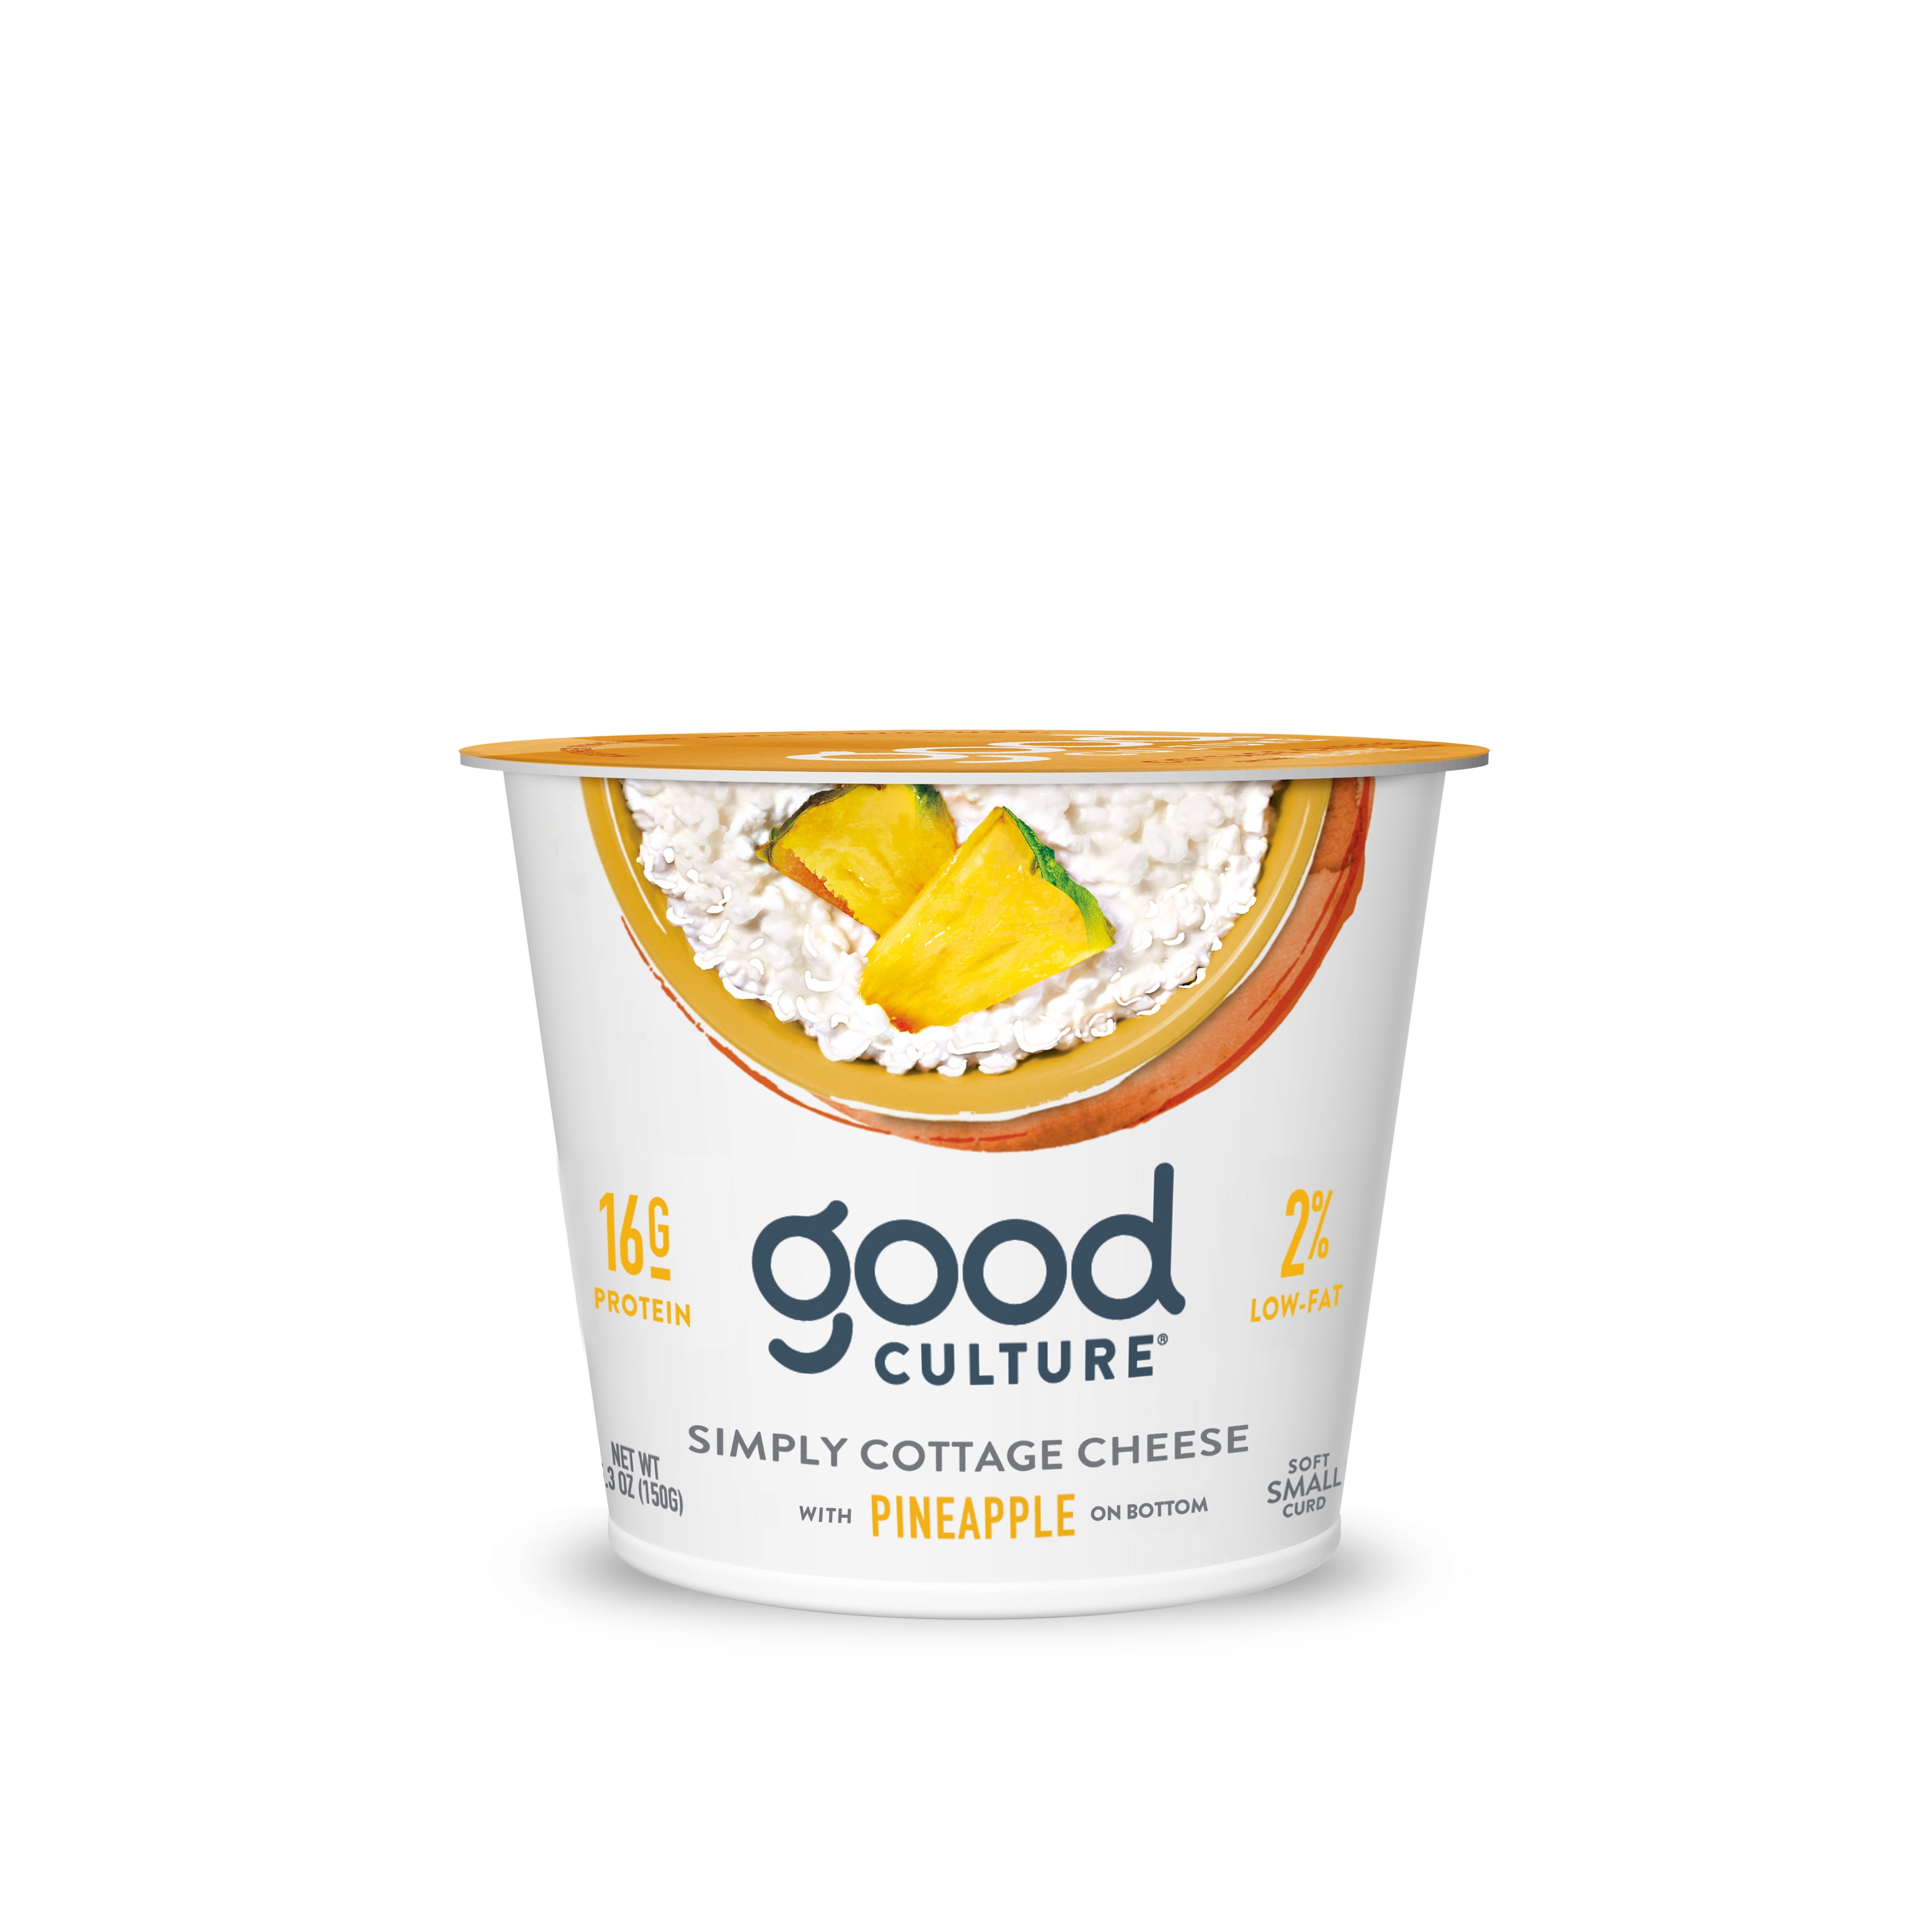 Good Culture 2 Low Fat Pineapple Simply Cottage Cheese 5 3 Oz